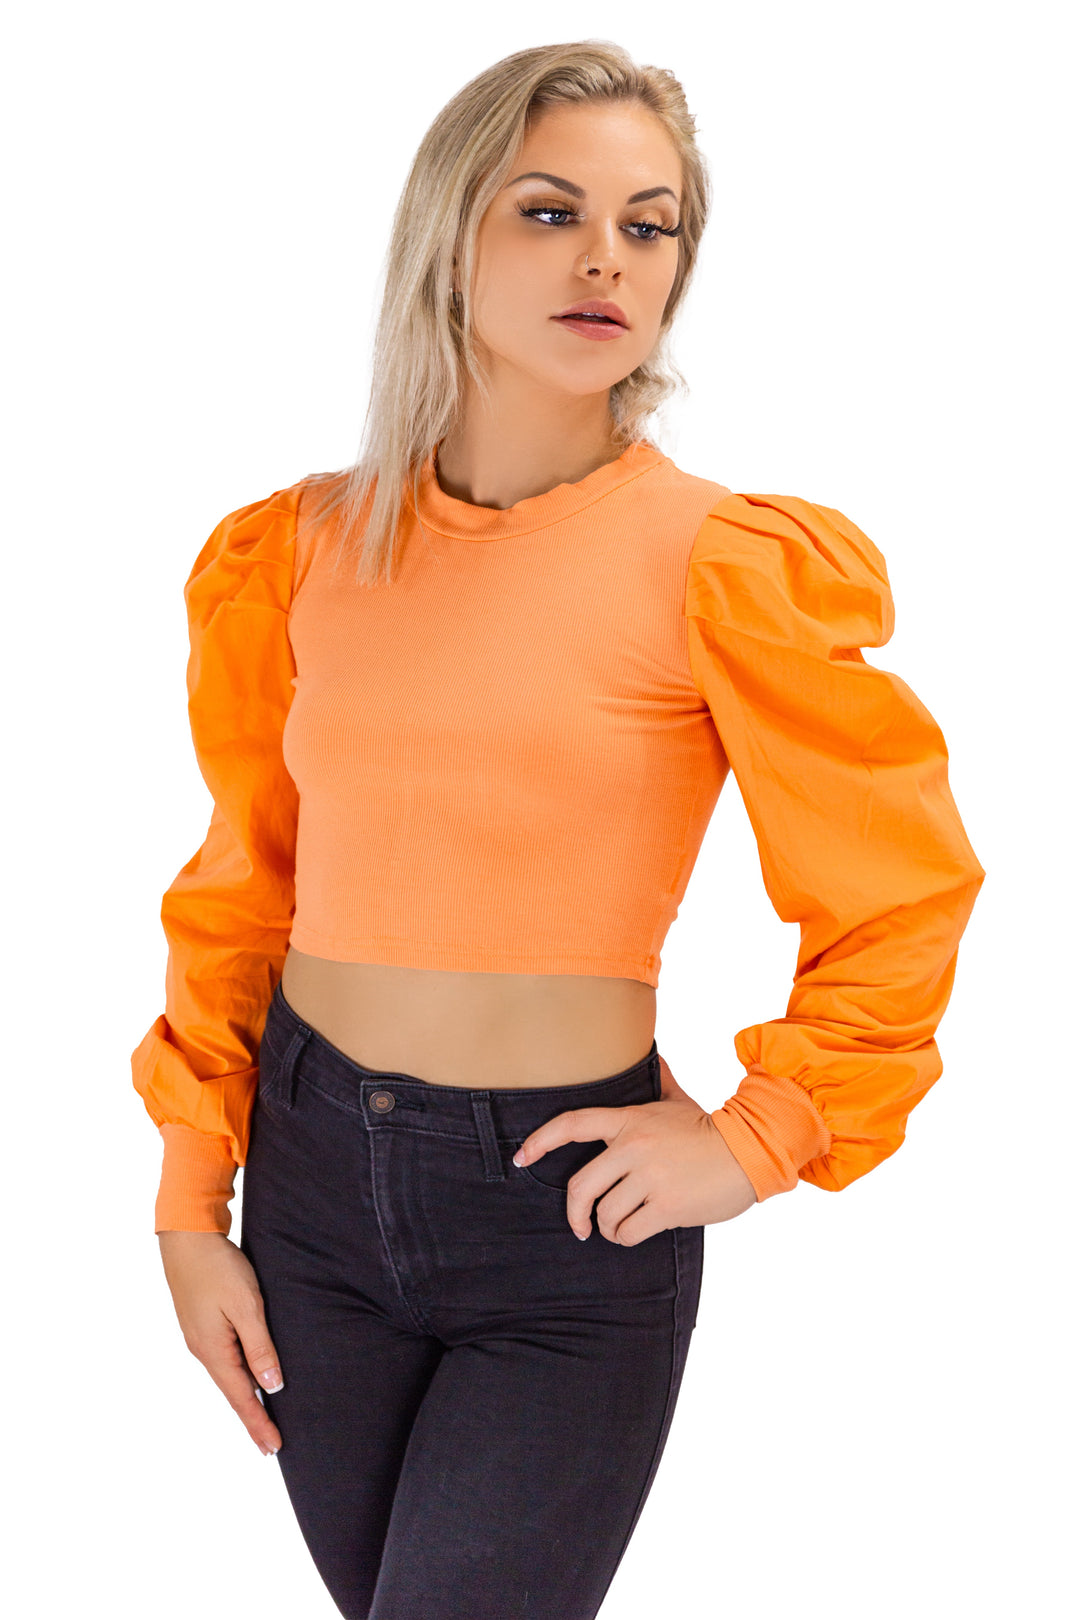 Citrus Chic: High Knit Neck Orange Blouse with Puff Sleeves